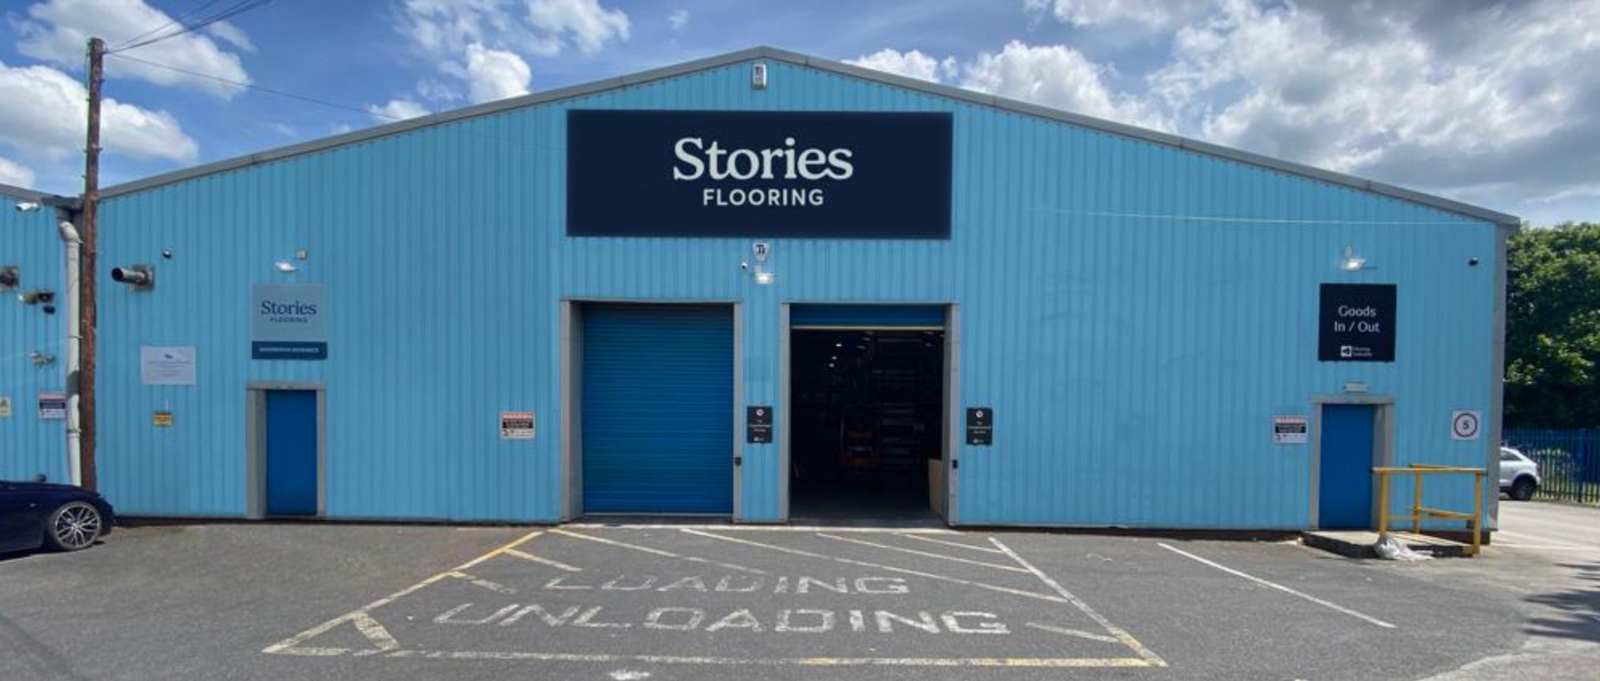 Stories Flooring hits record high after rebranding during pandemic